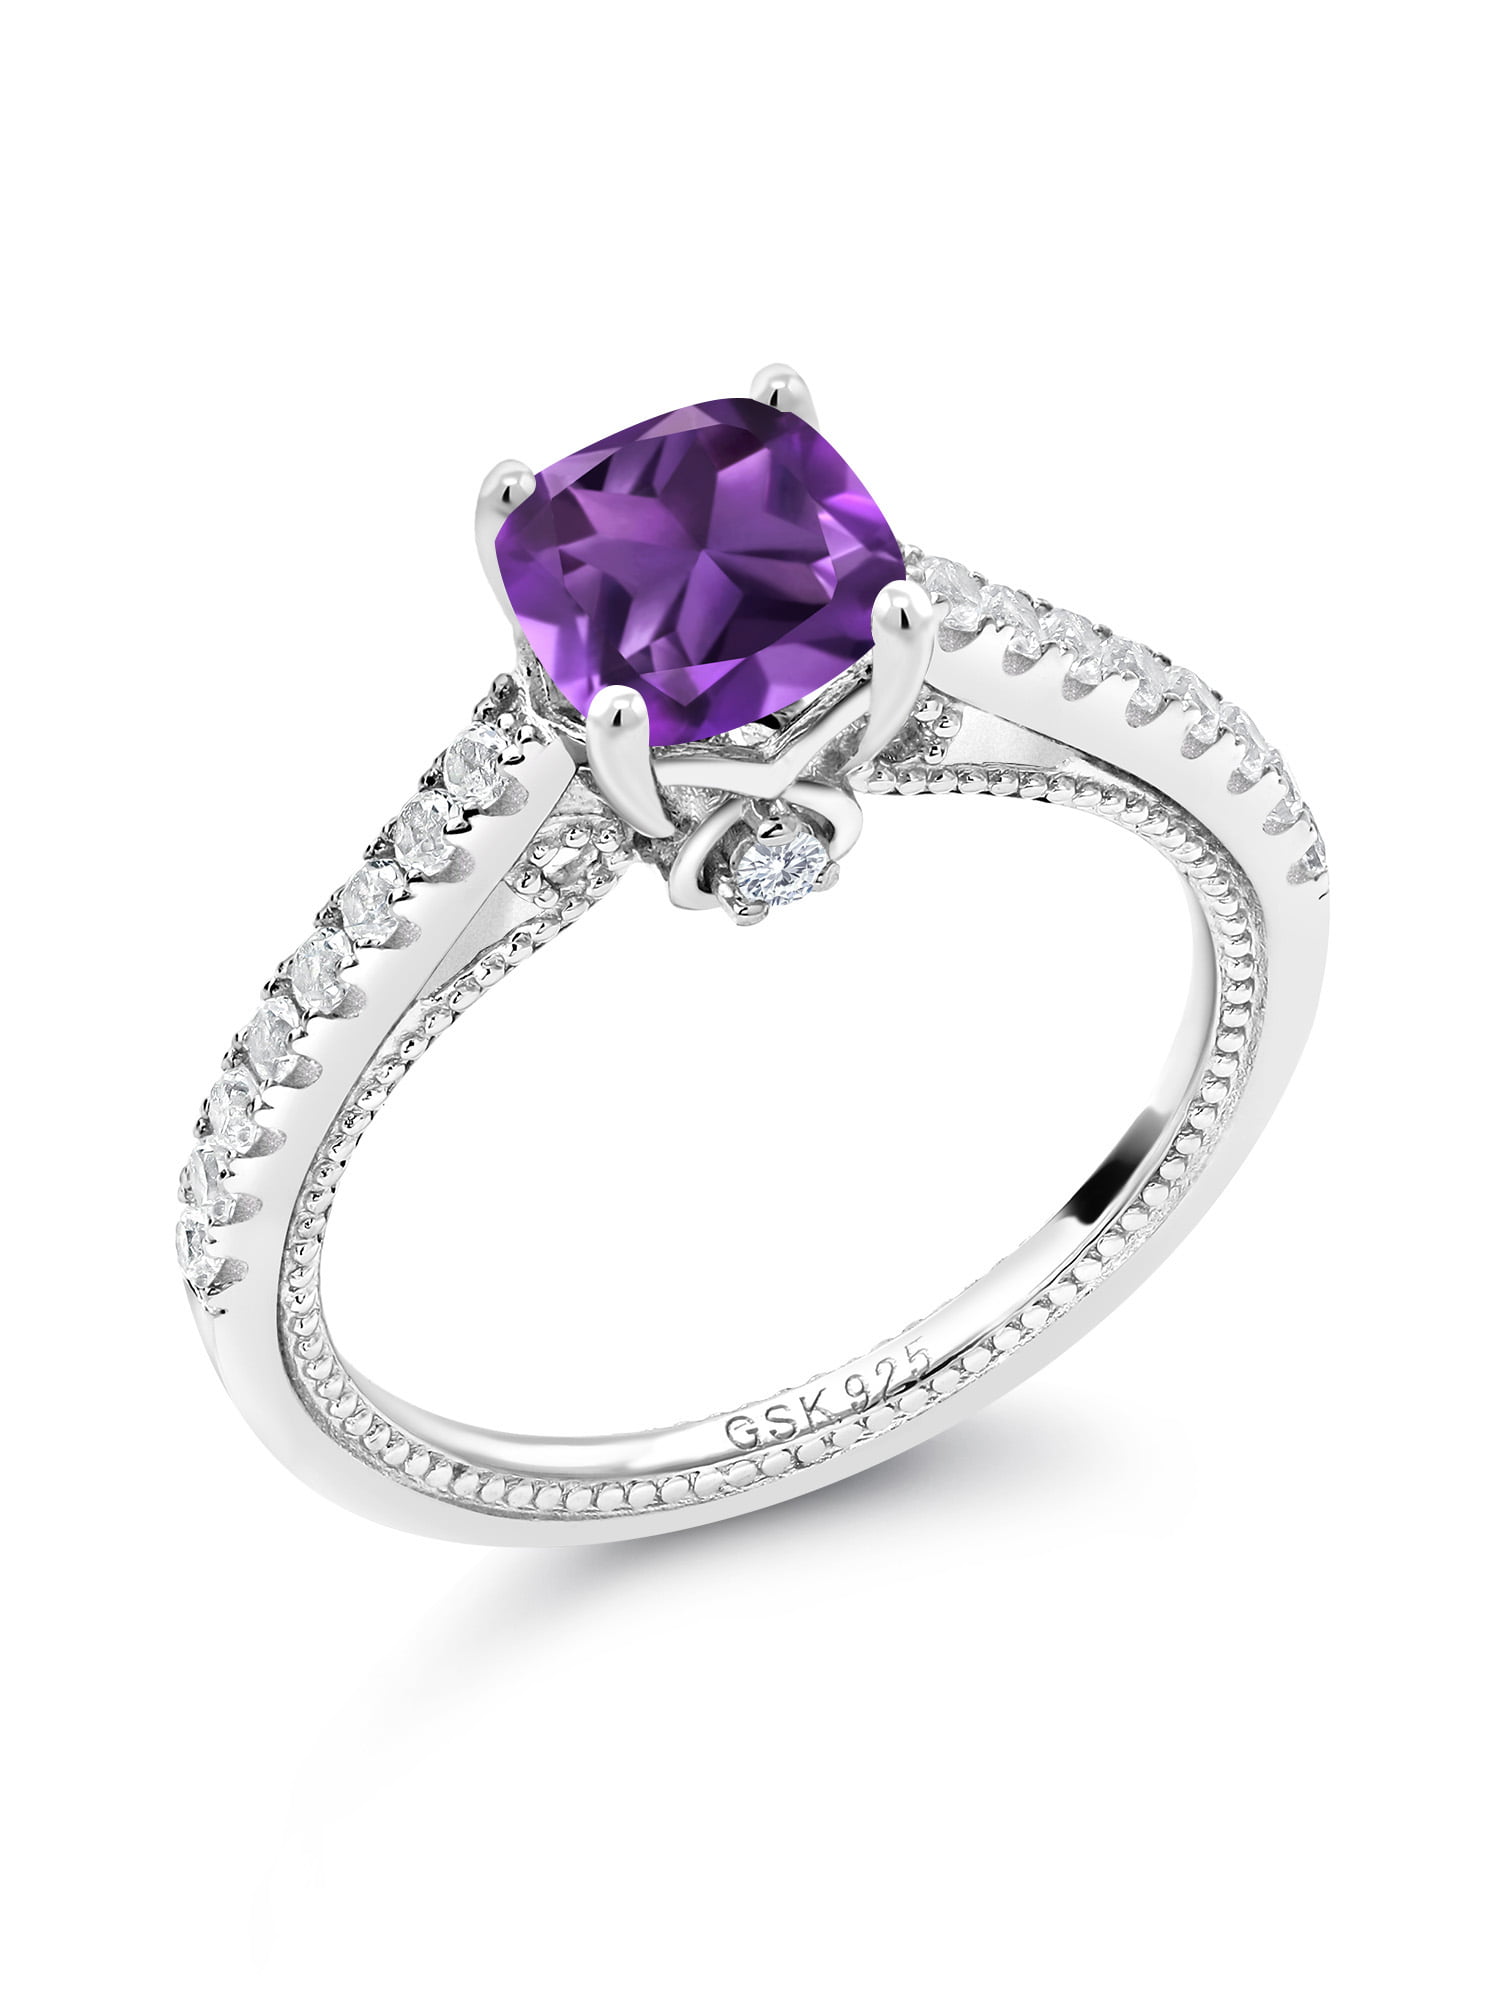 Gem Stone King 1.24 Ct Cushion Purple Amethyst White Created Sapphire 925 Sterling Silver Ring 